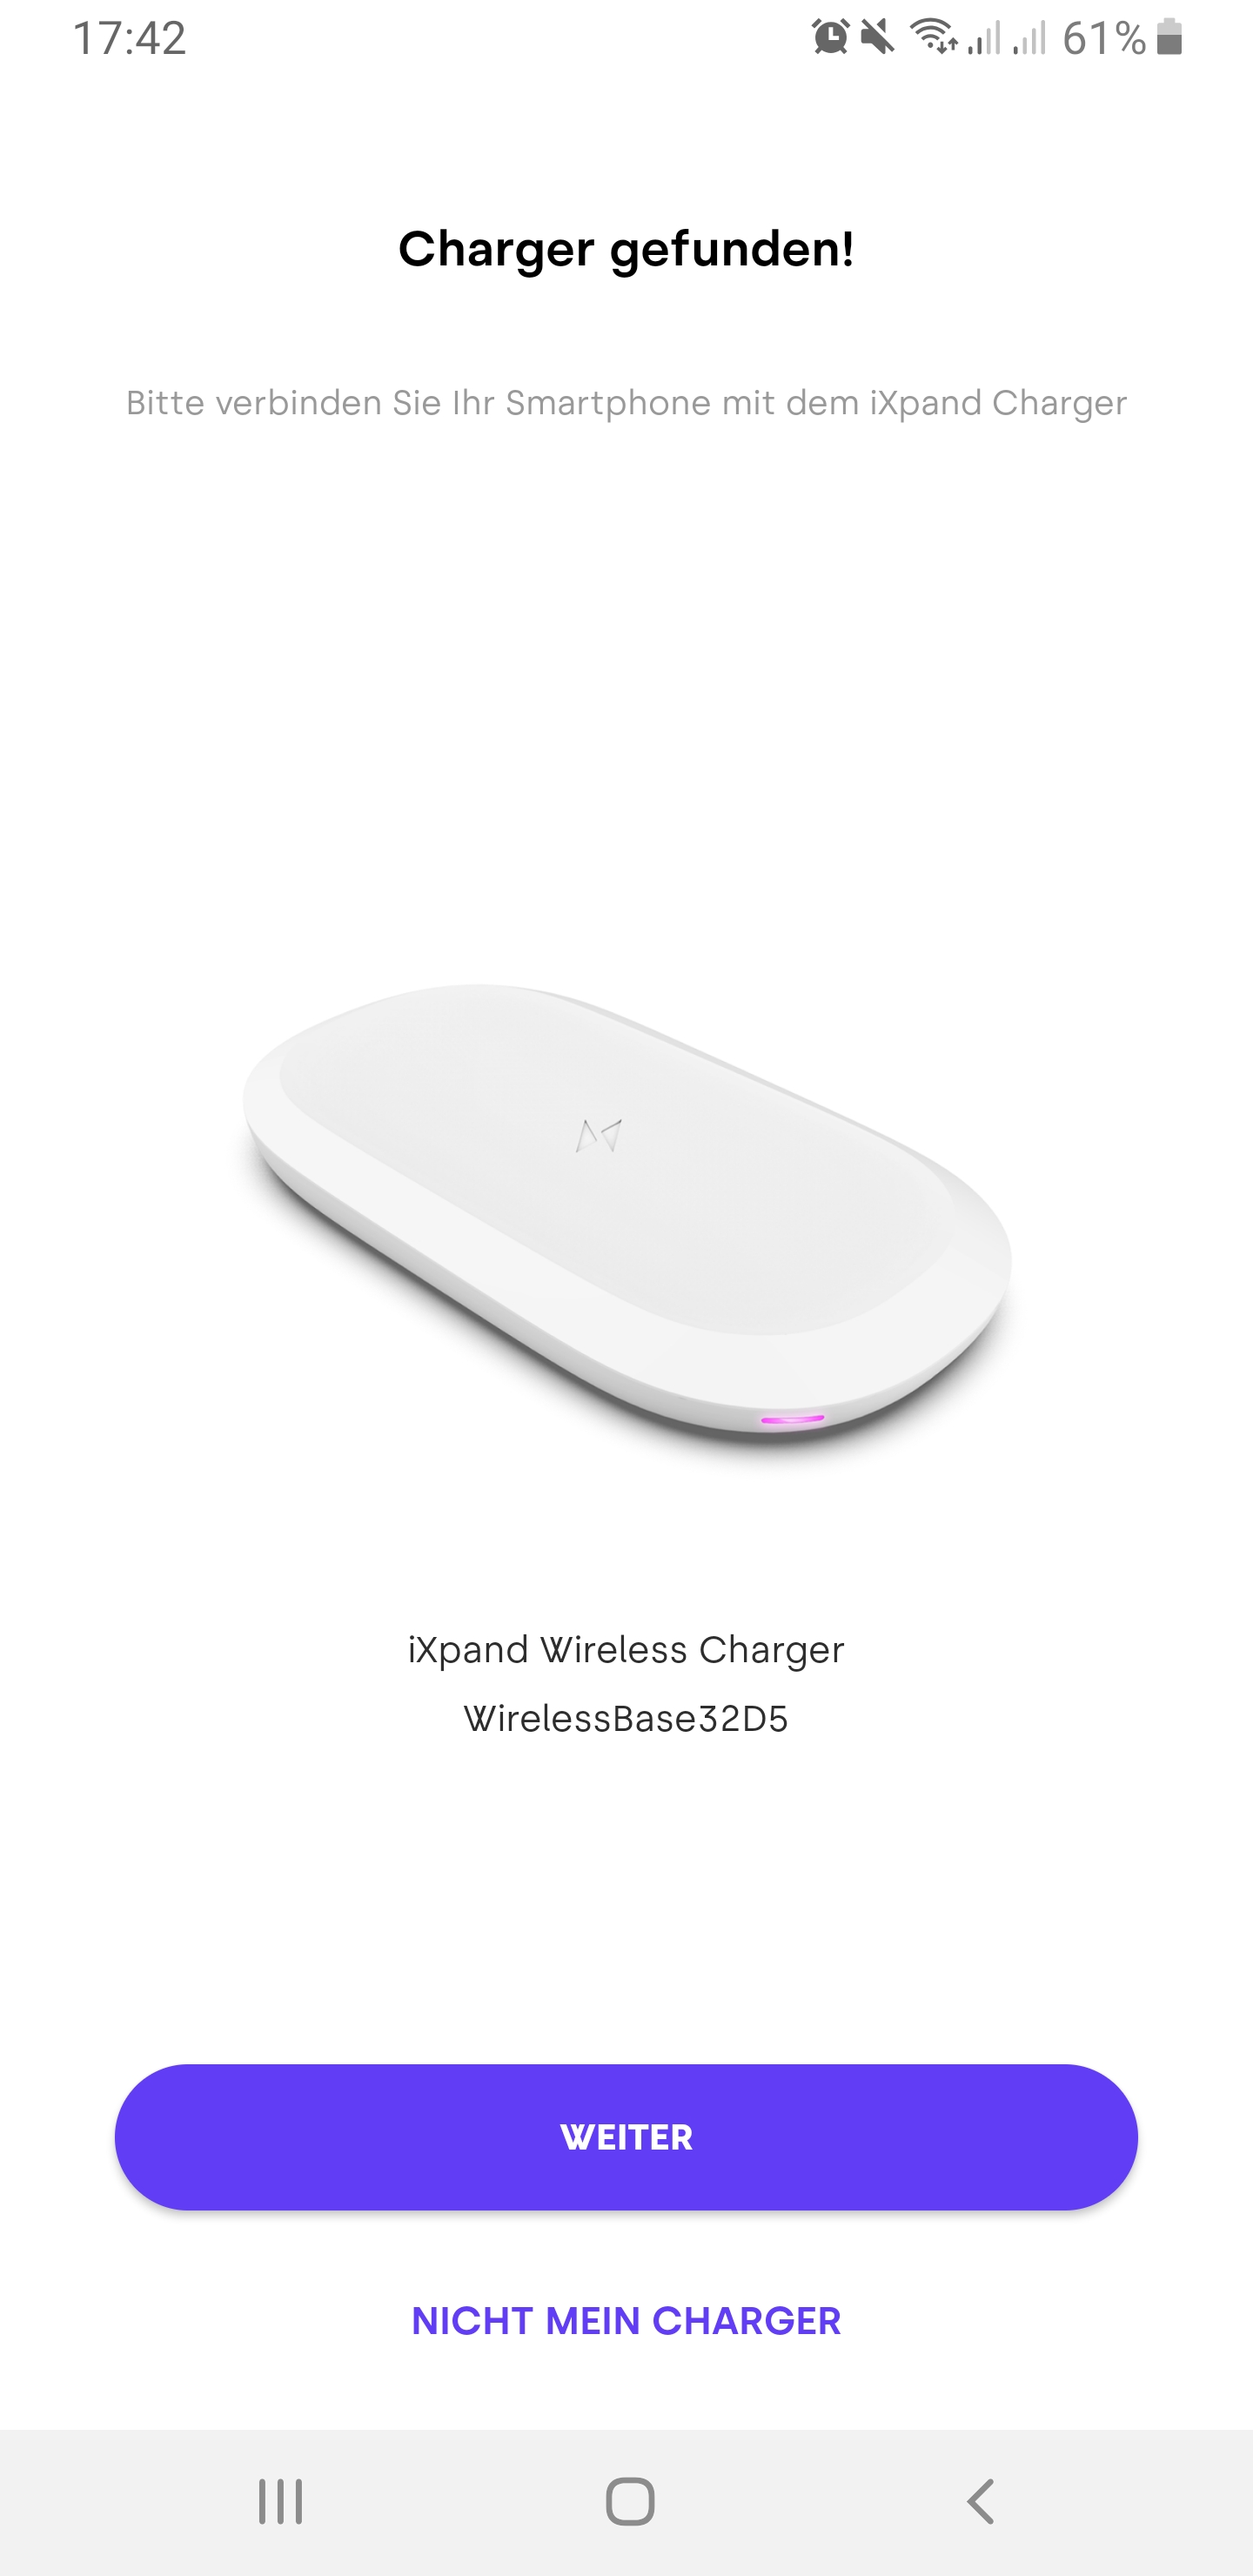 SanDisk IXpand Wireless Charger 05